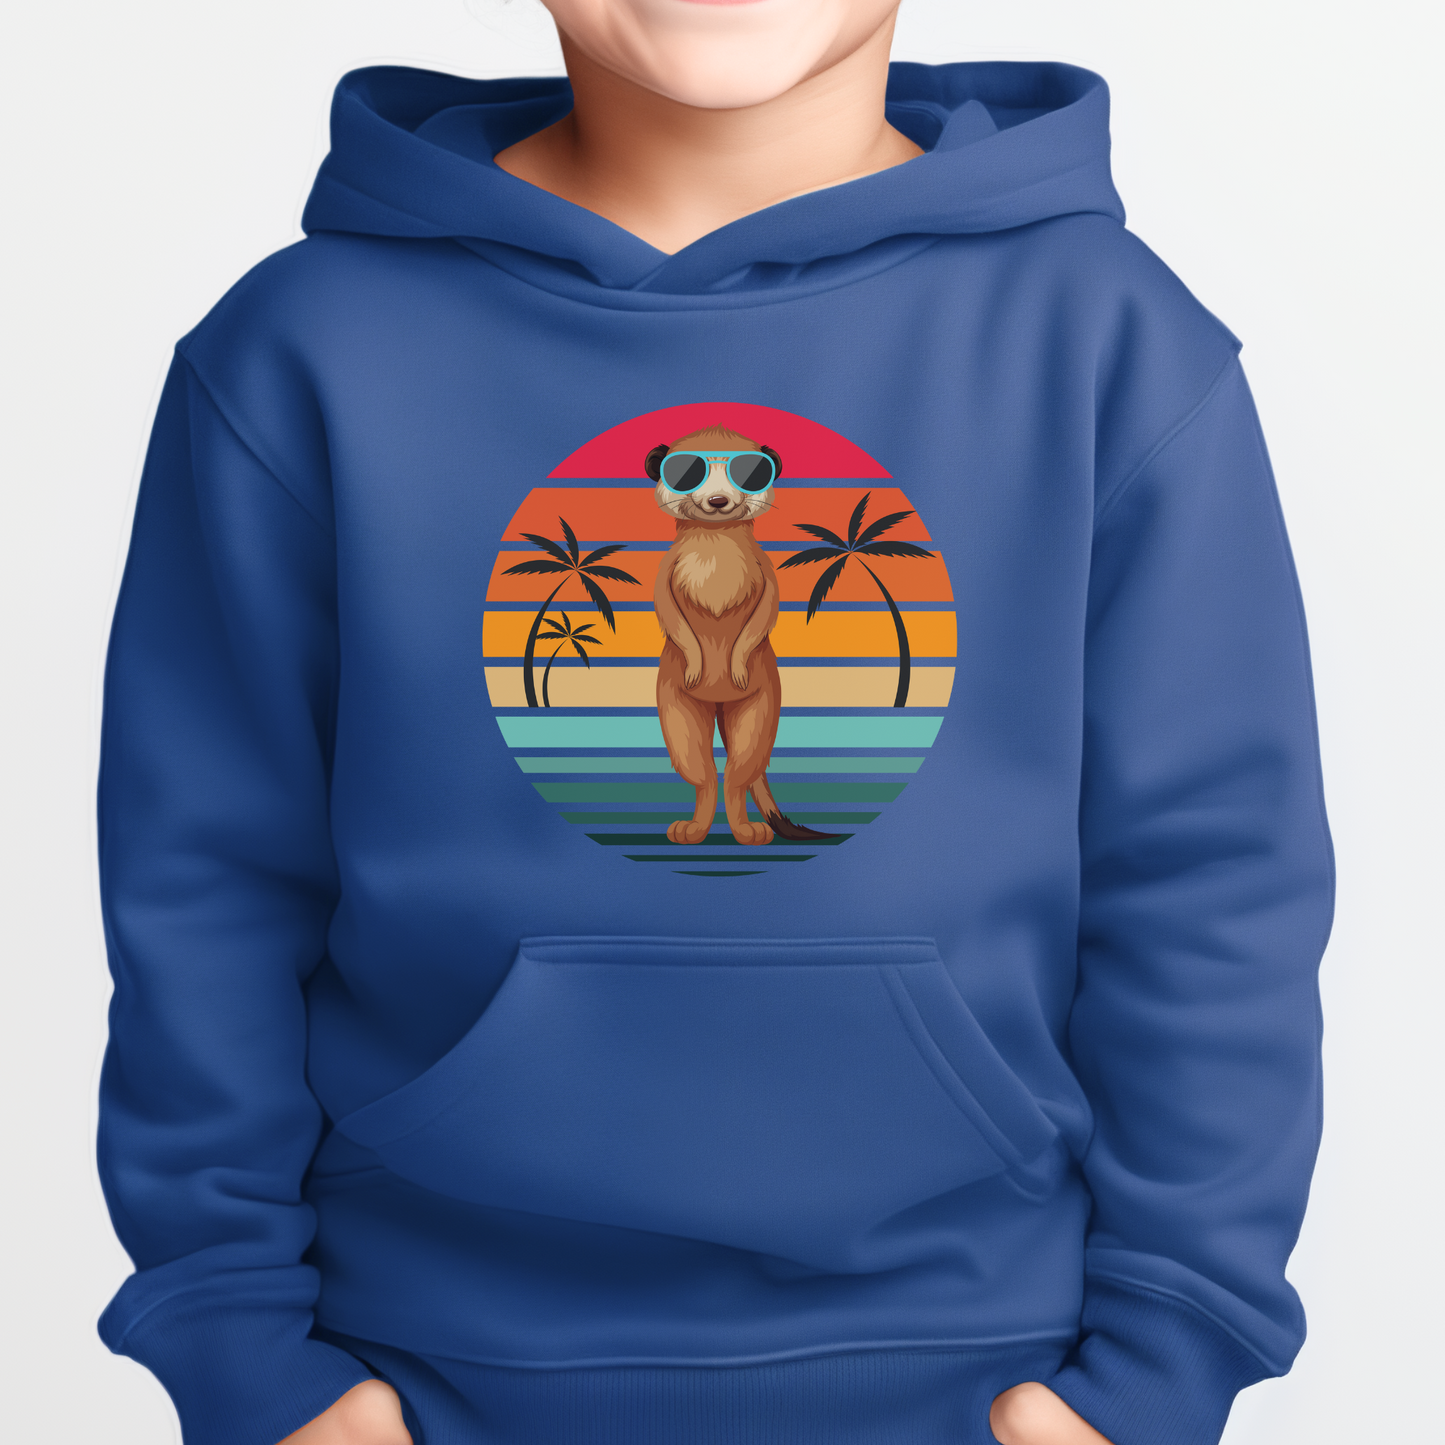 Boy wearing a royal blue hoodie with a printed design of a meerkat wearing sunglasses